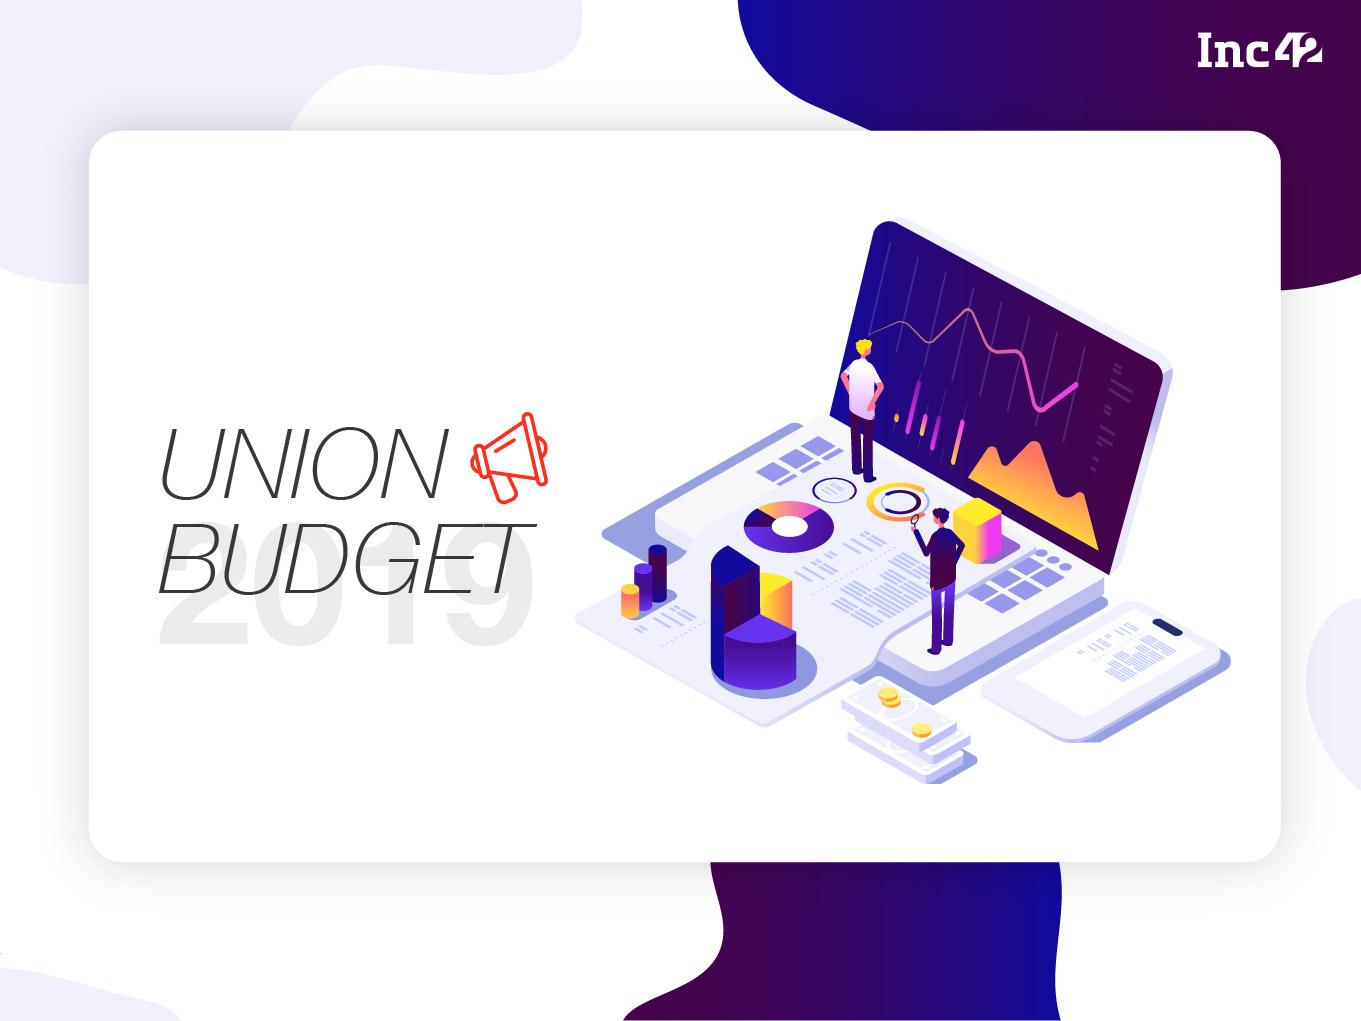 Union Budget 2019: What Do Fintech Startups Want From The Upcoming Budget